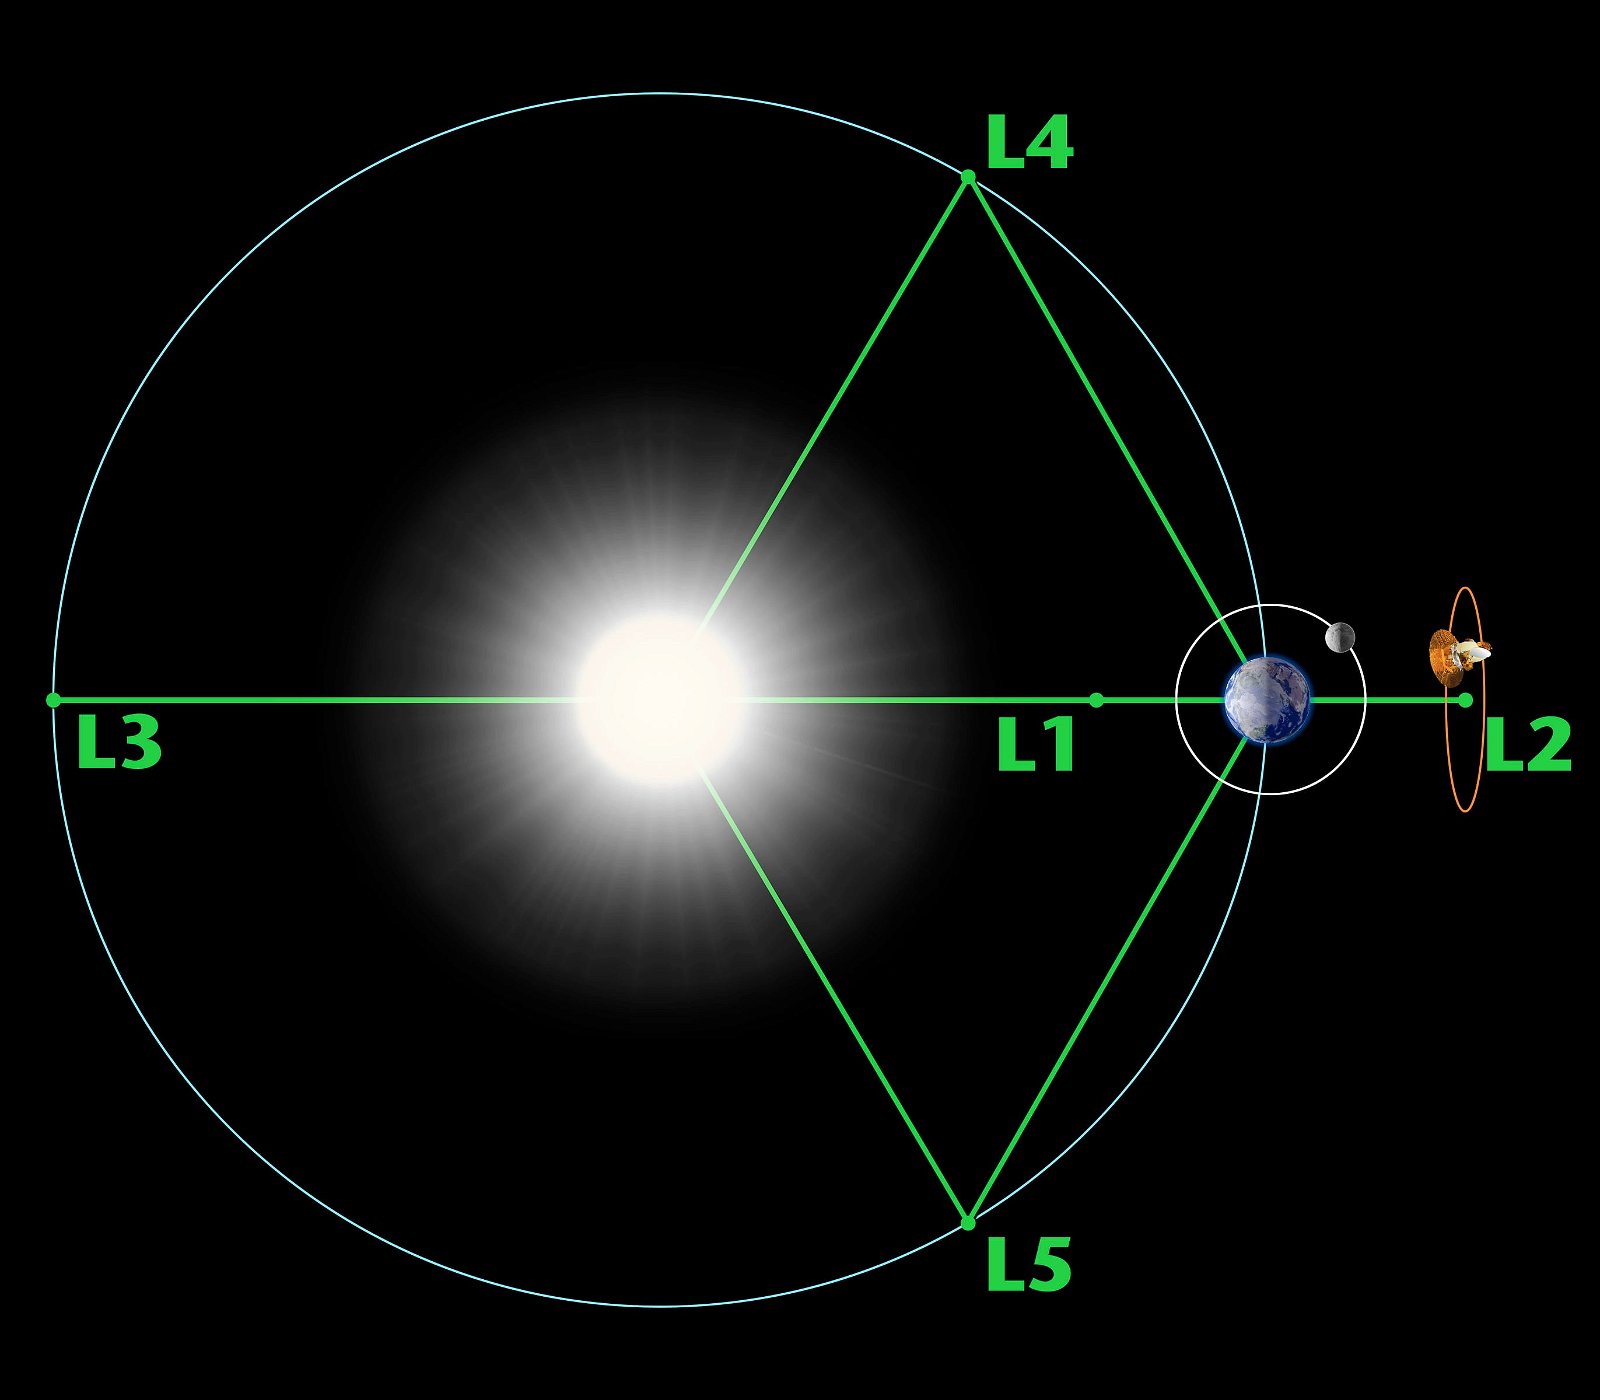 L1 (Lagrange 1) Point: Location Around which Aditya L-1 Spacecraft will be Placed